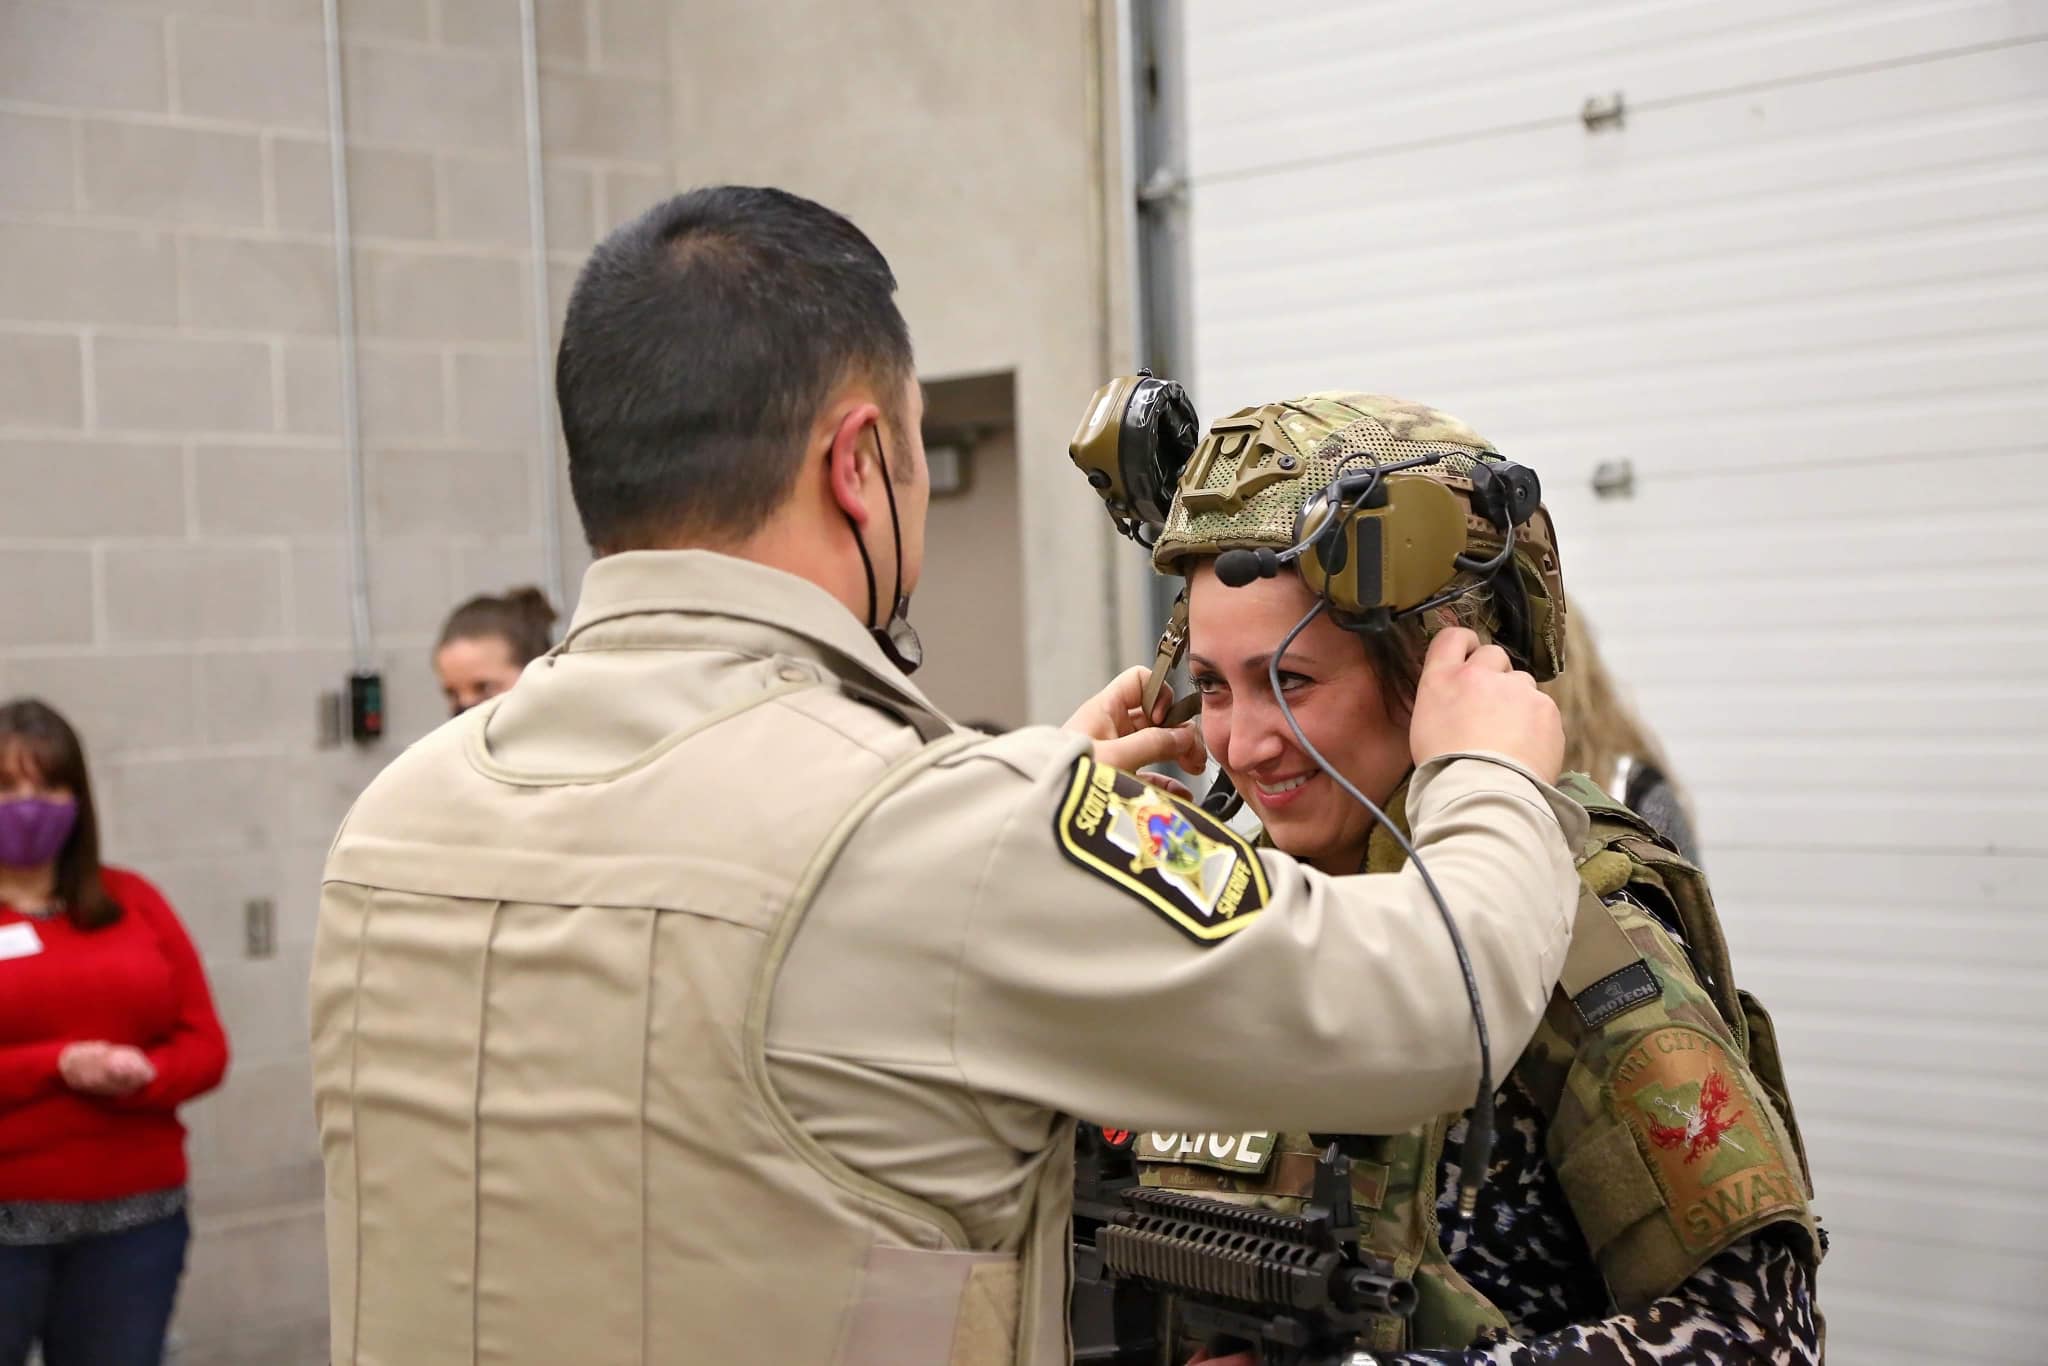 An officer assists a woman with her helmet during a community training academy.